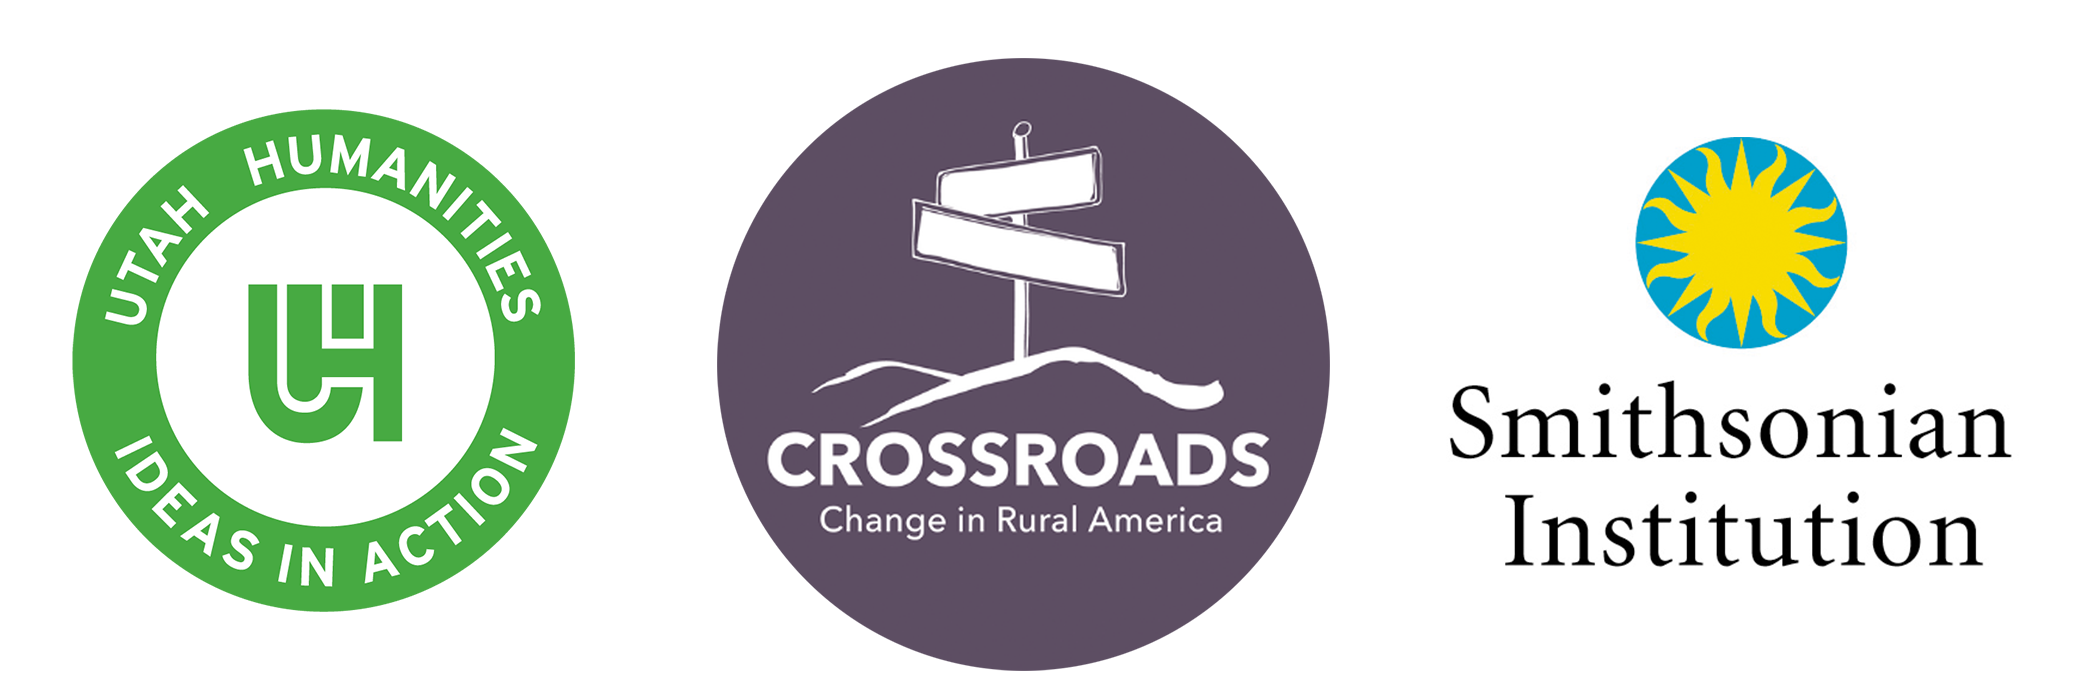 Logos for Utah Humanities, the Crossroads exhibition, and the Smithsonian Institution.